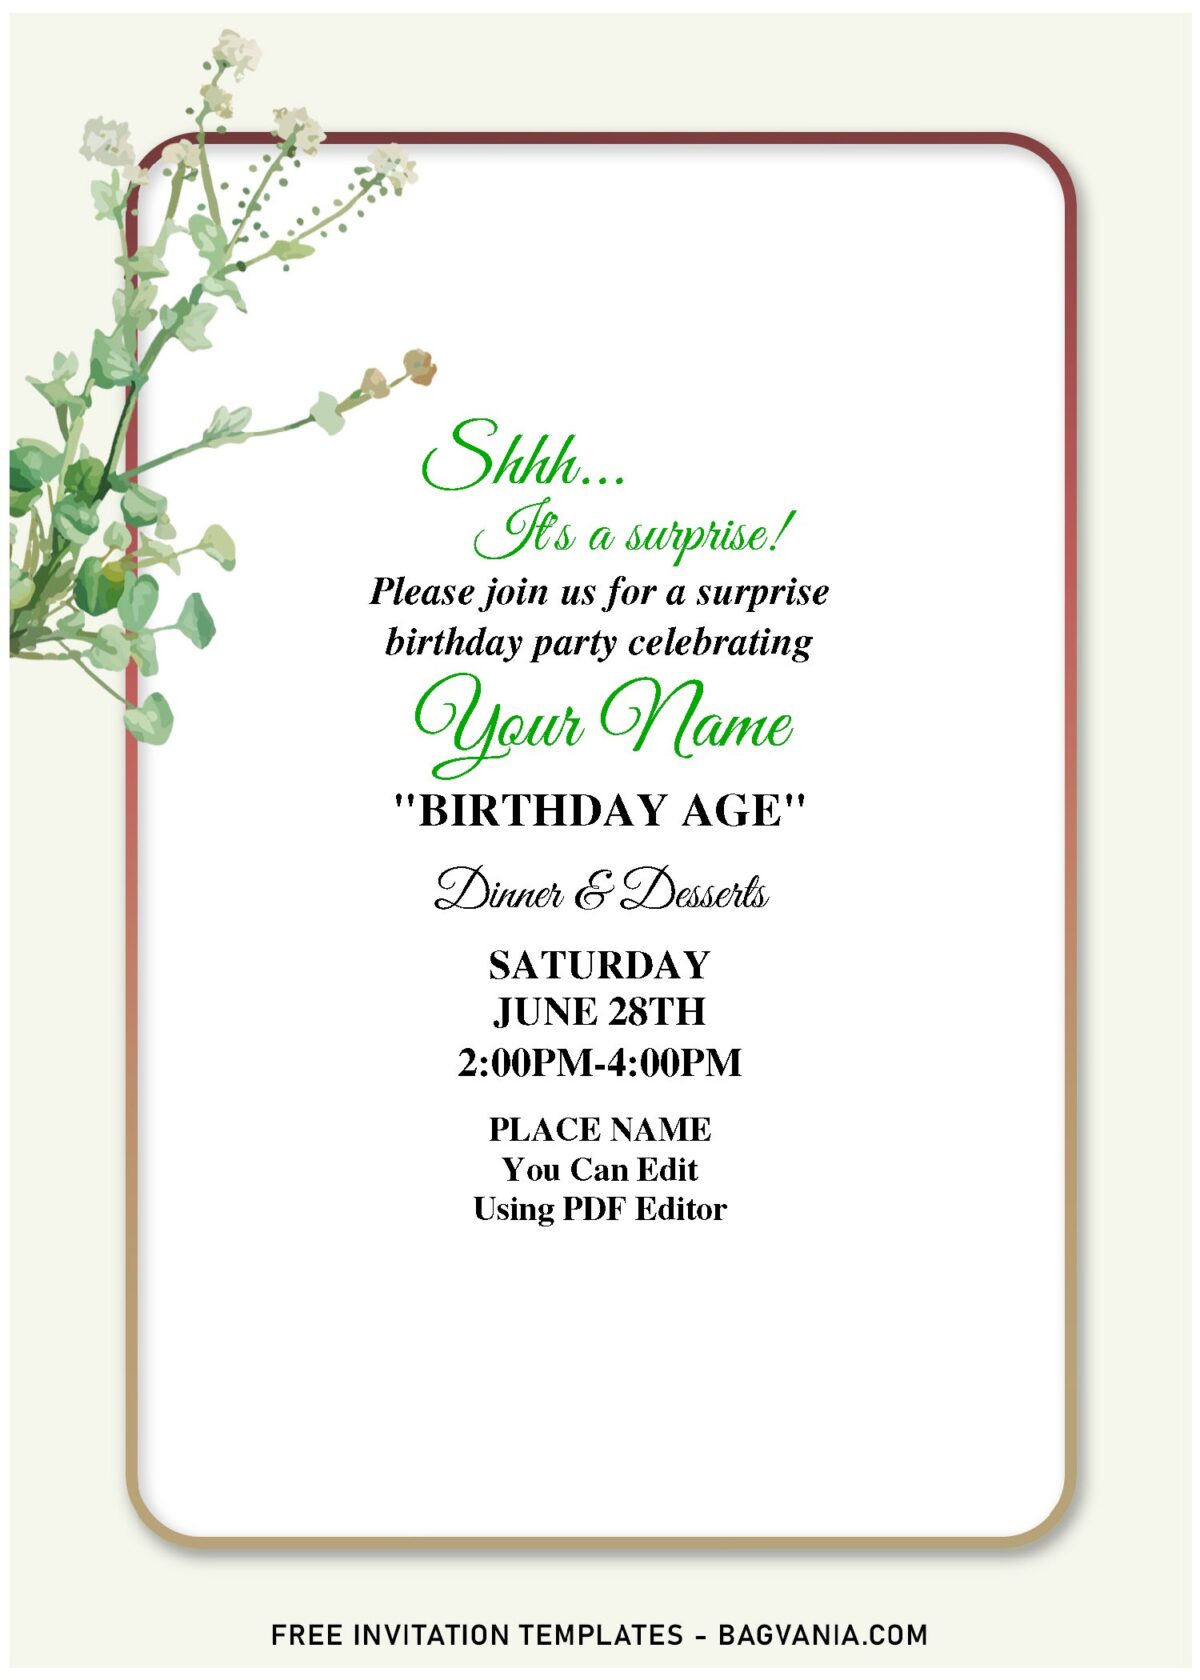 (Free Editable PDF) Mixed Southern Summer Flowers Invitation Templates with elegant script